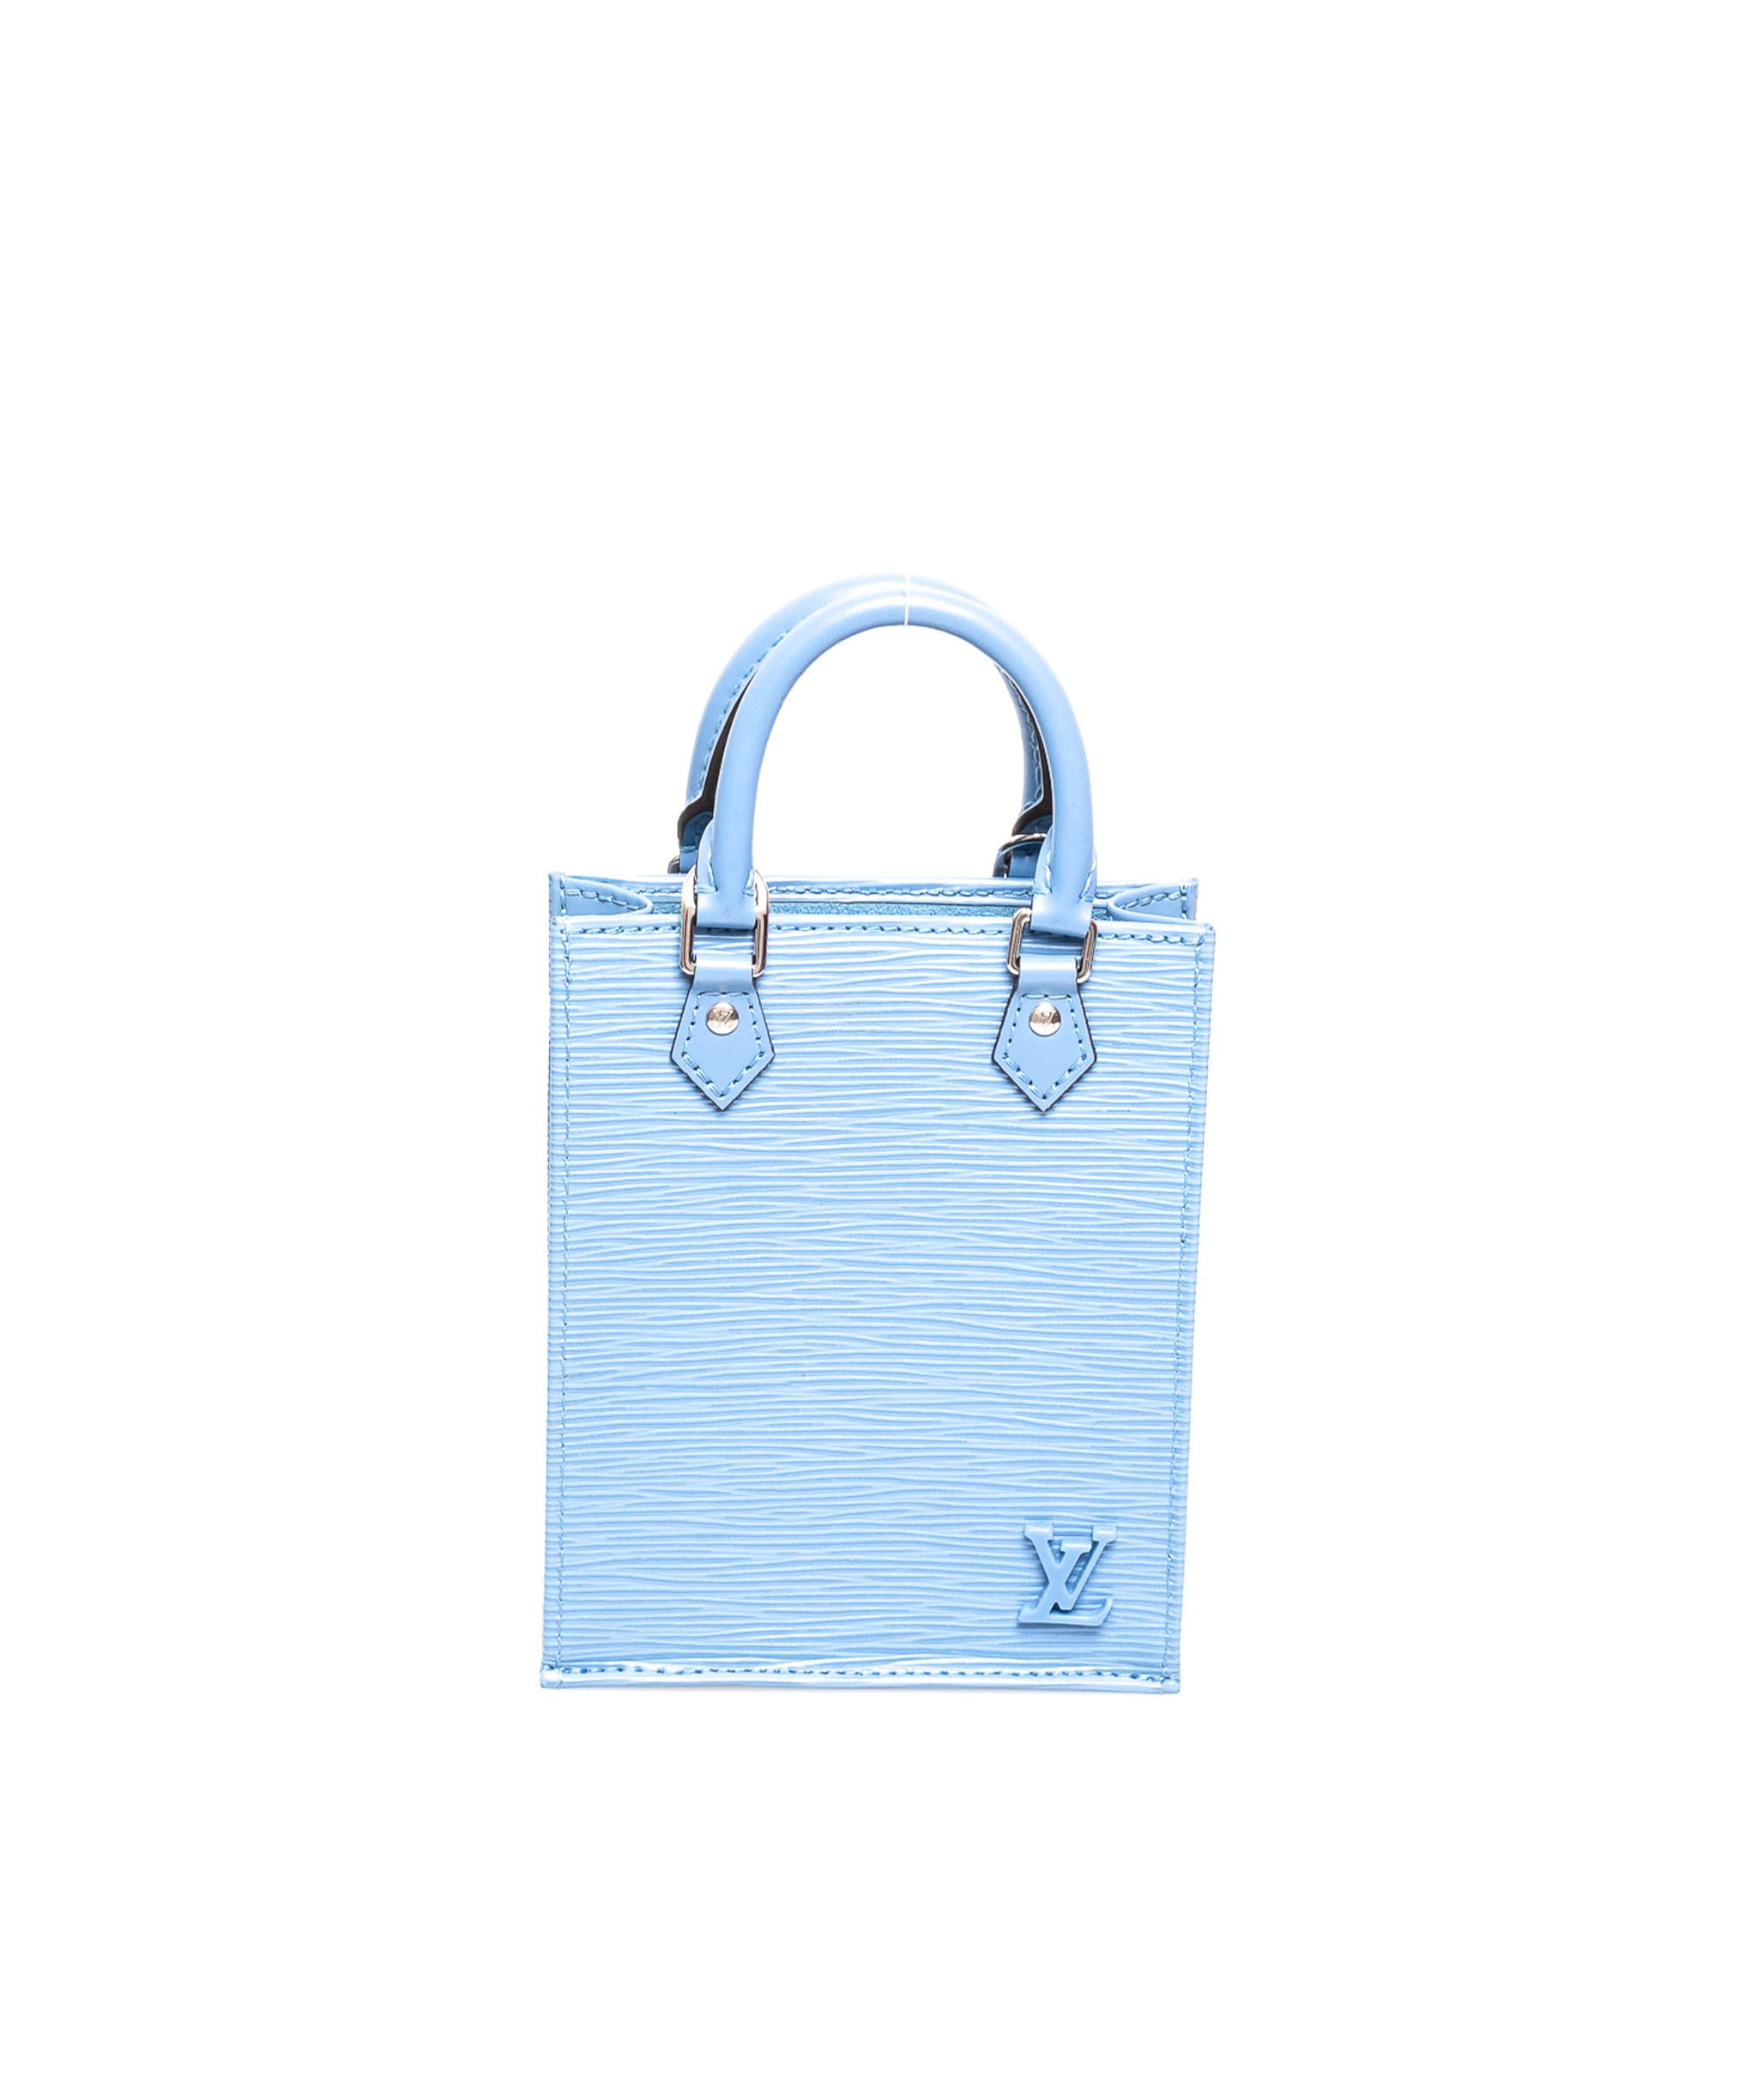 LV Sac Plat XS: The small bag we all prayed for 